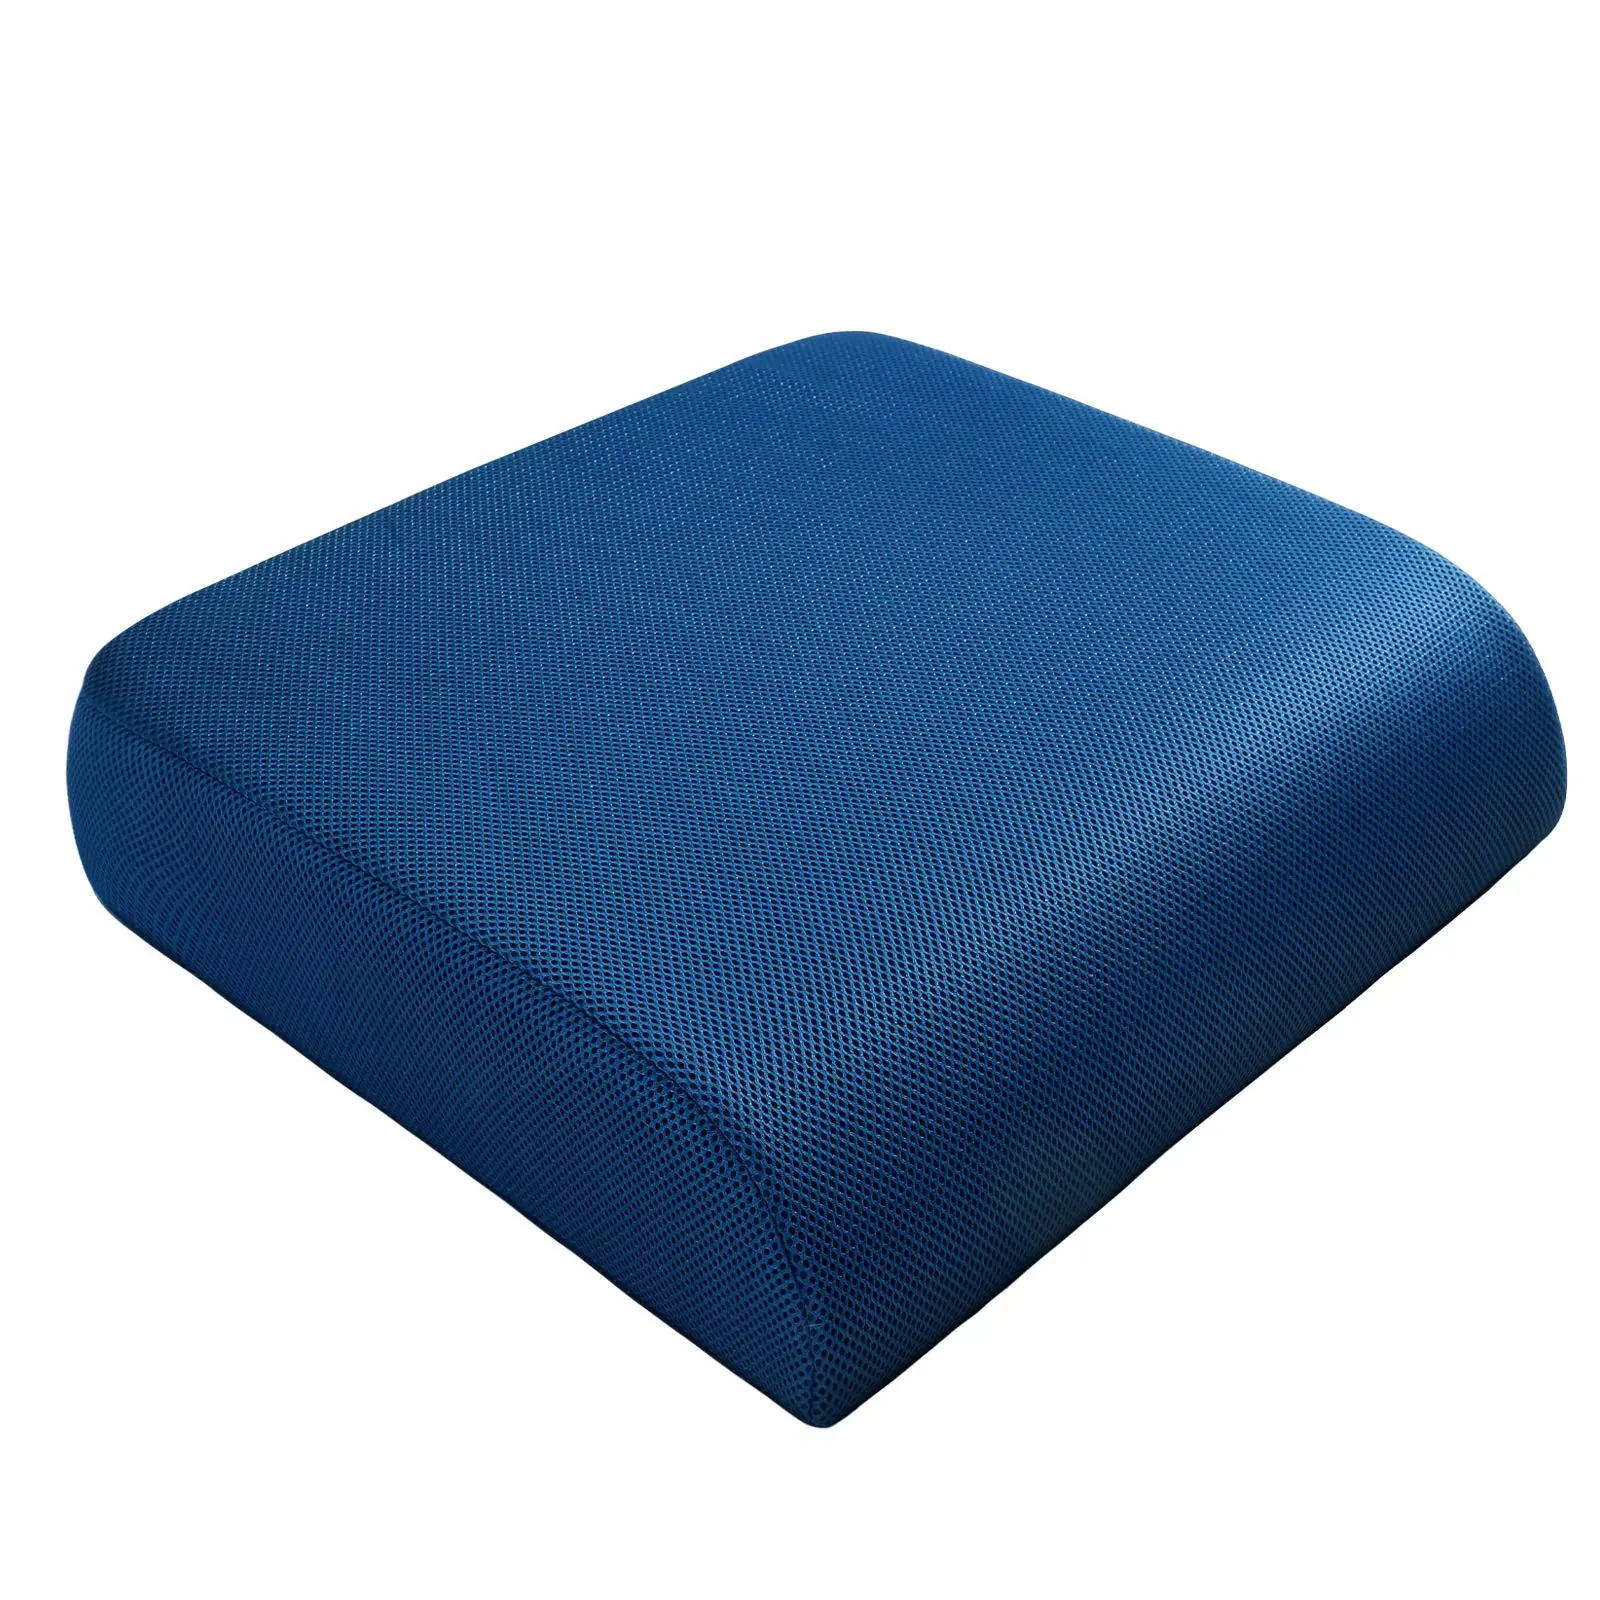 Extra Thick Seat Cushion Gel Memory Foam Cushion With Non Slip Bottom Pain Relief Coccyx Cushion for Wheelchair Office Chair